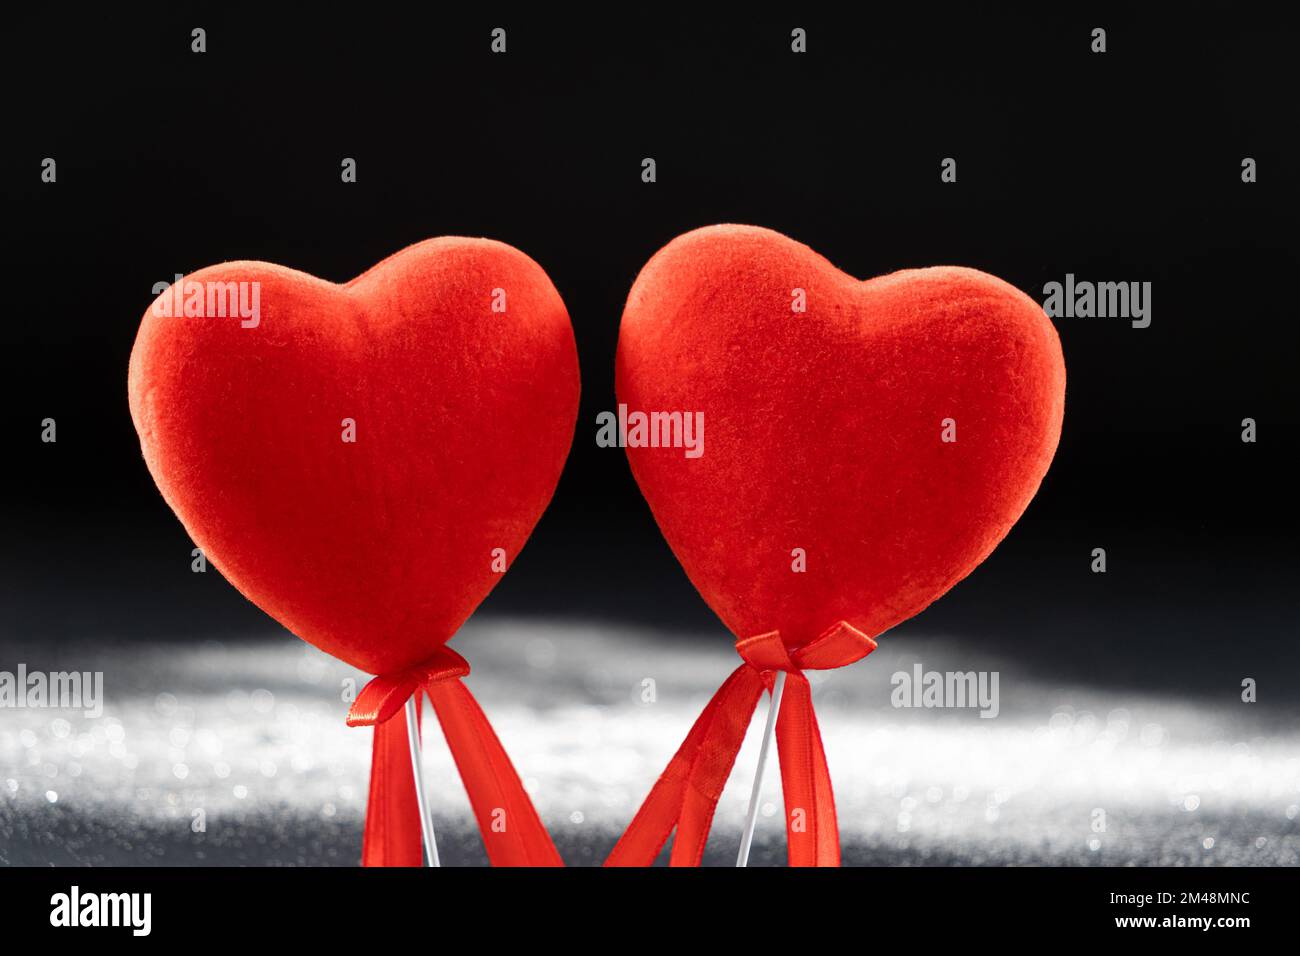 Valentine's Day, two red loving hearts on a black background with sequins. Stock Photo